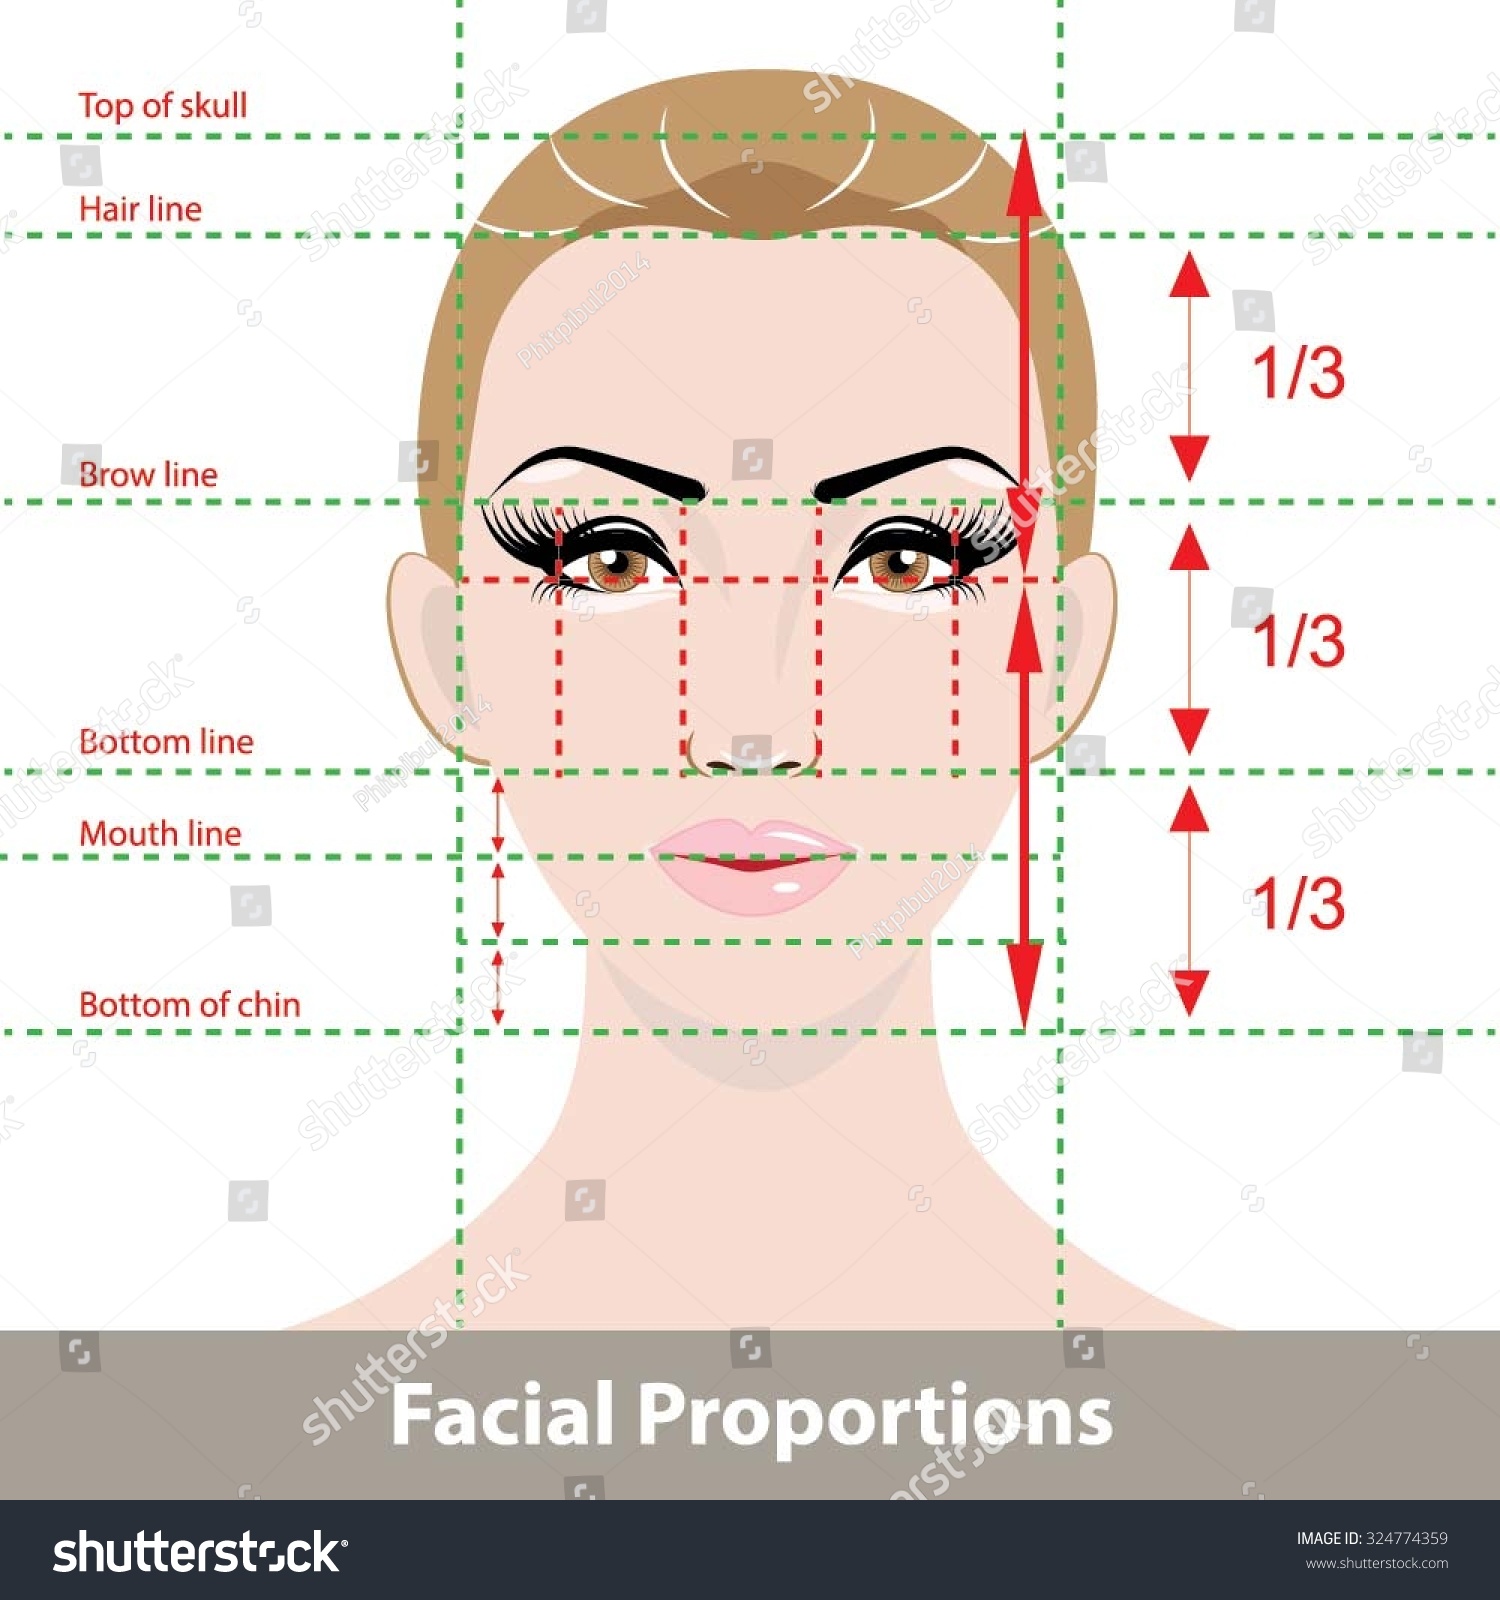 Perfect Face Proportions Stock Vector Illustration 324774359 Shutterstock 